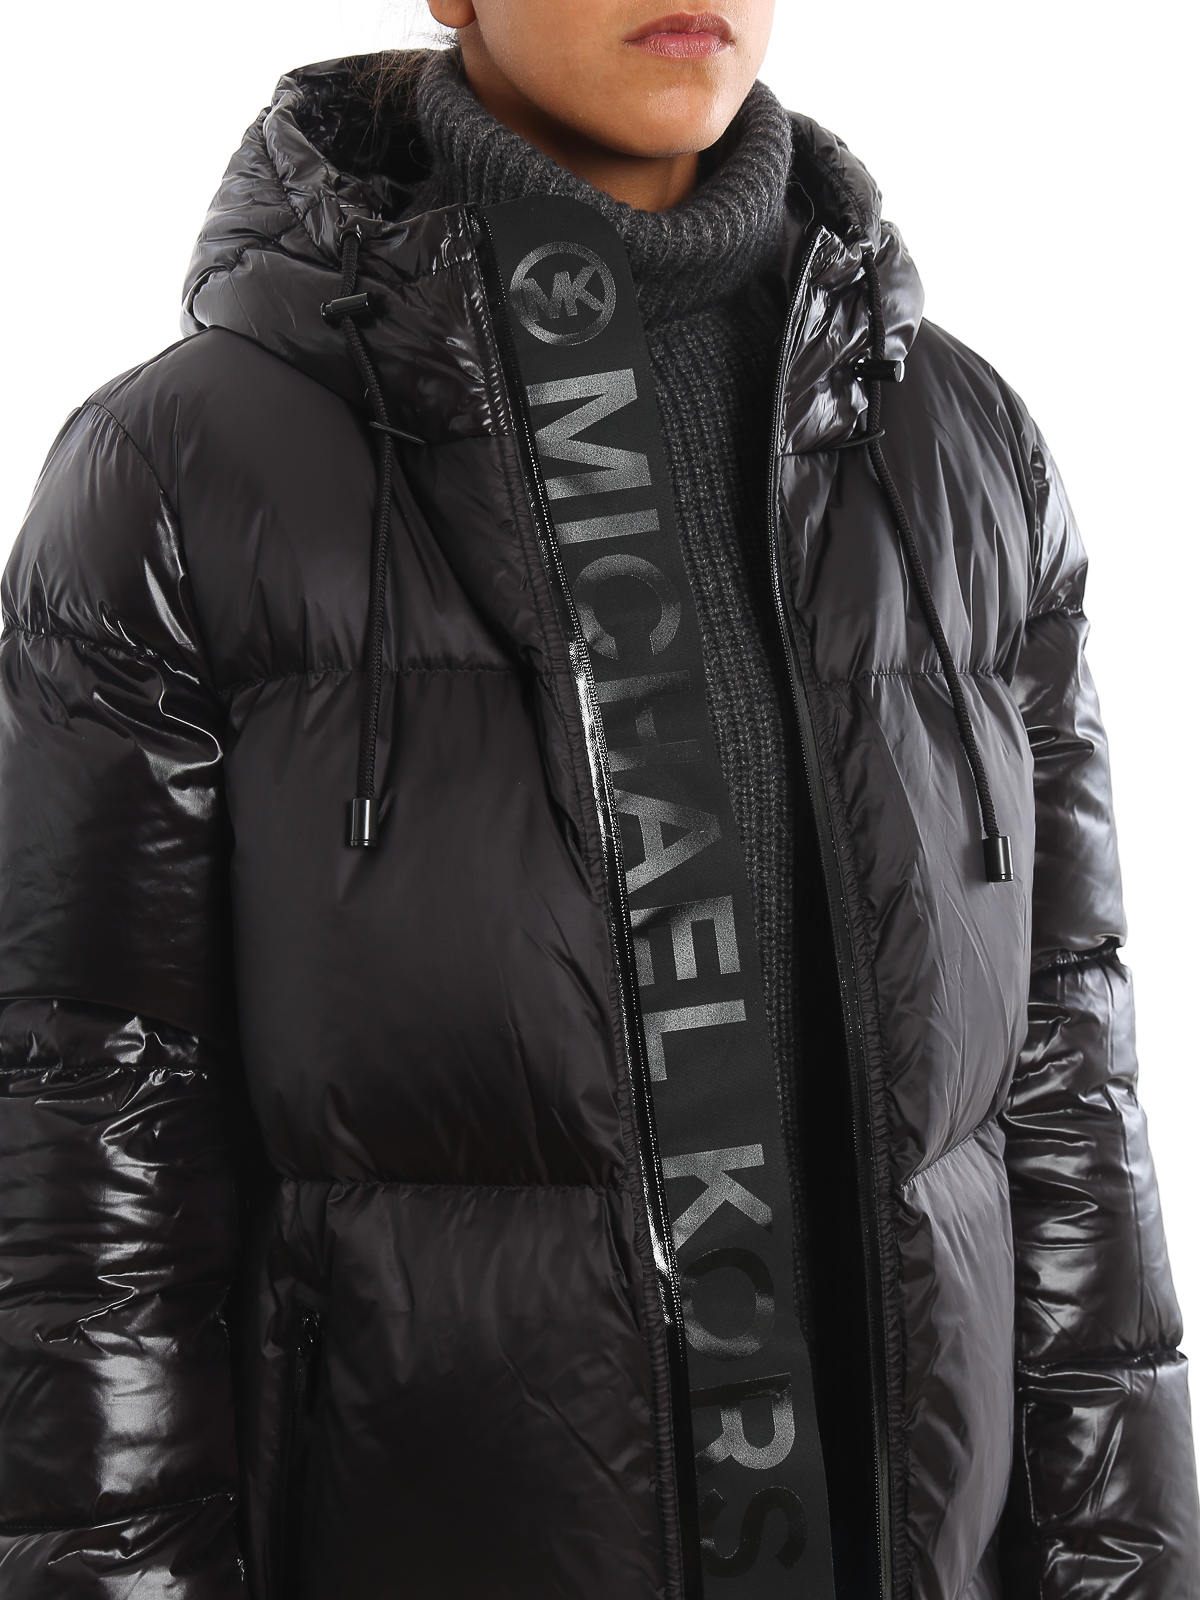 Michael Kors Reversible Quilted Puffer Jacket  NavyOlive